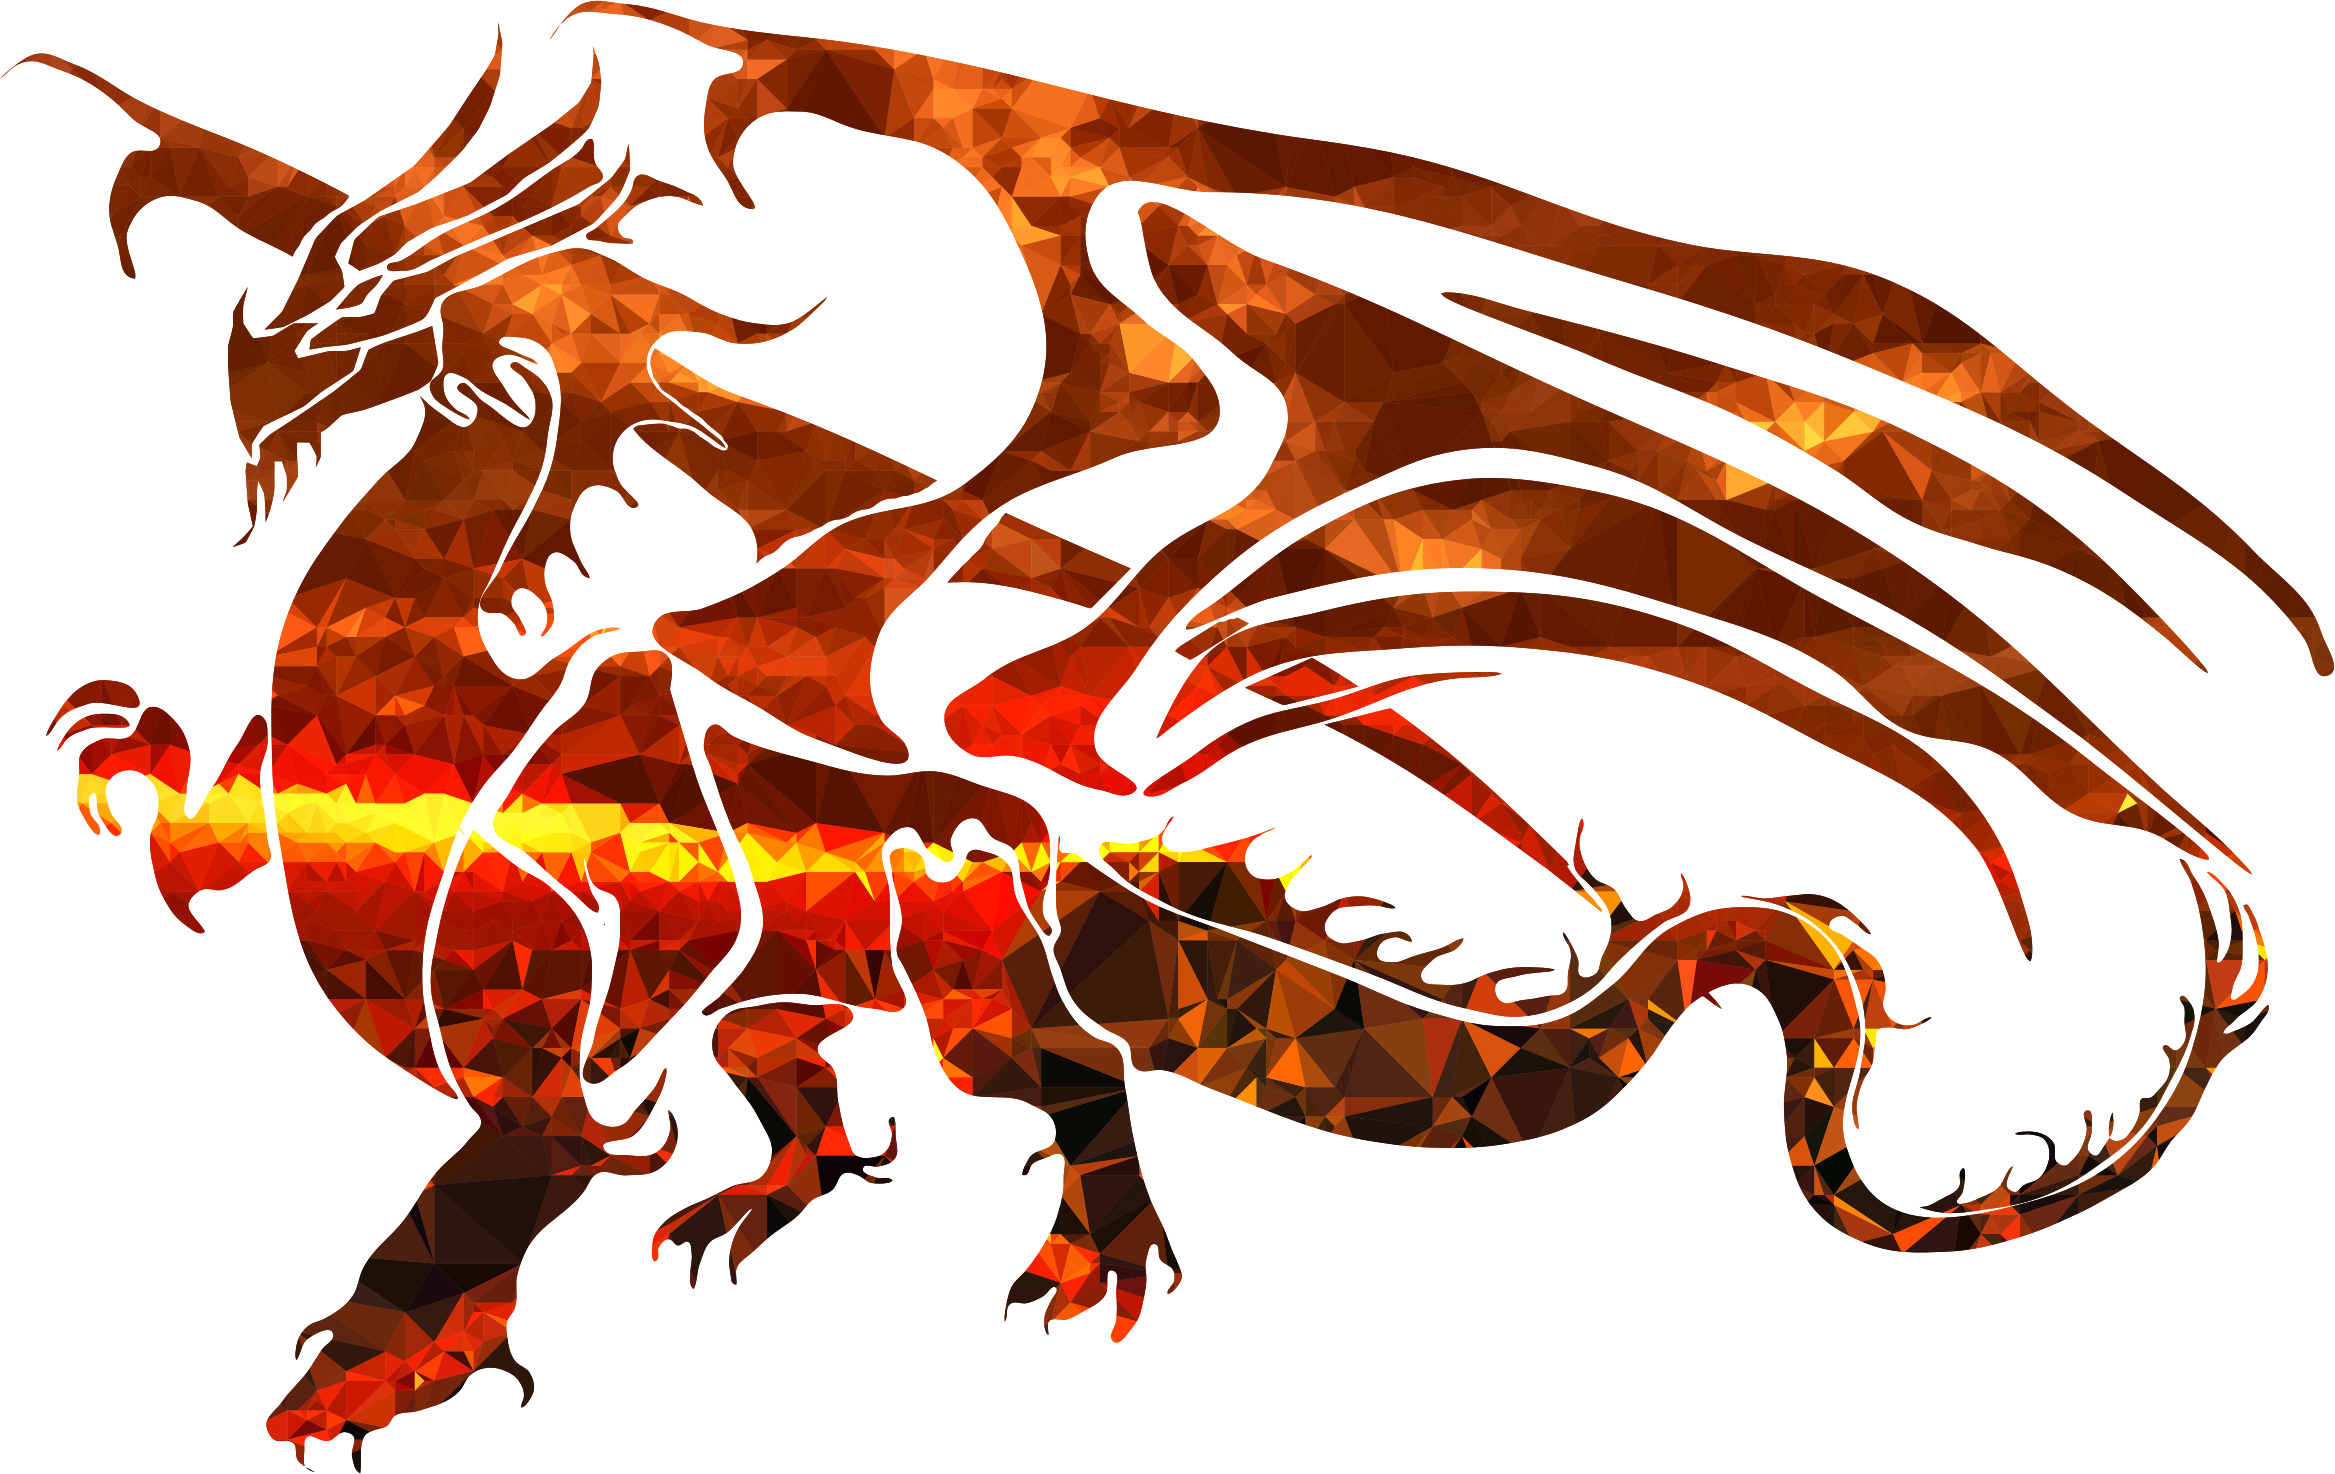 Chinese Dragon Silhouette Clip Art Dragon Png Download 23351474